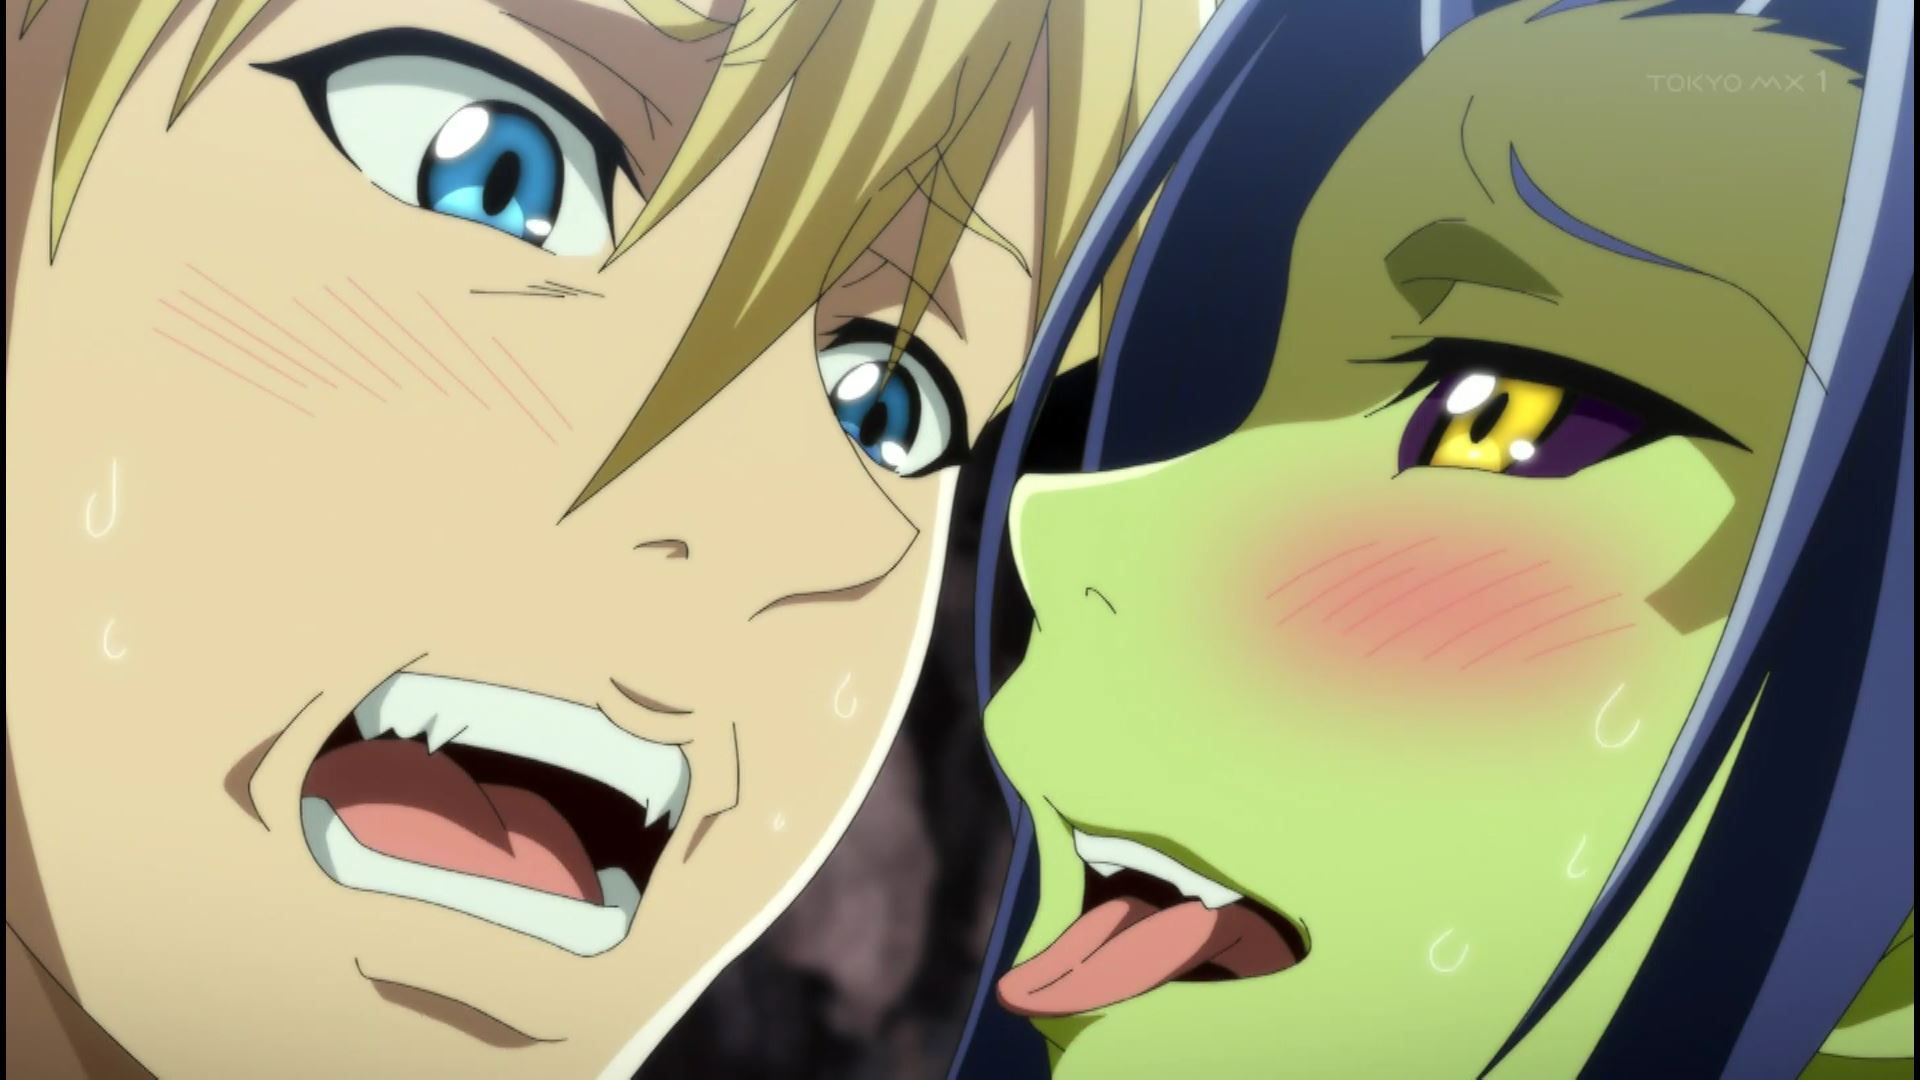 The goblin girl and ecchi scene that got estrus in episode 2 of the second season of the anime "Peter Grill and the Time of the Wise"! 10